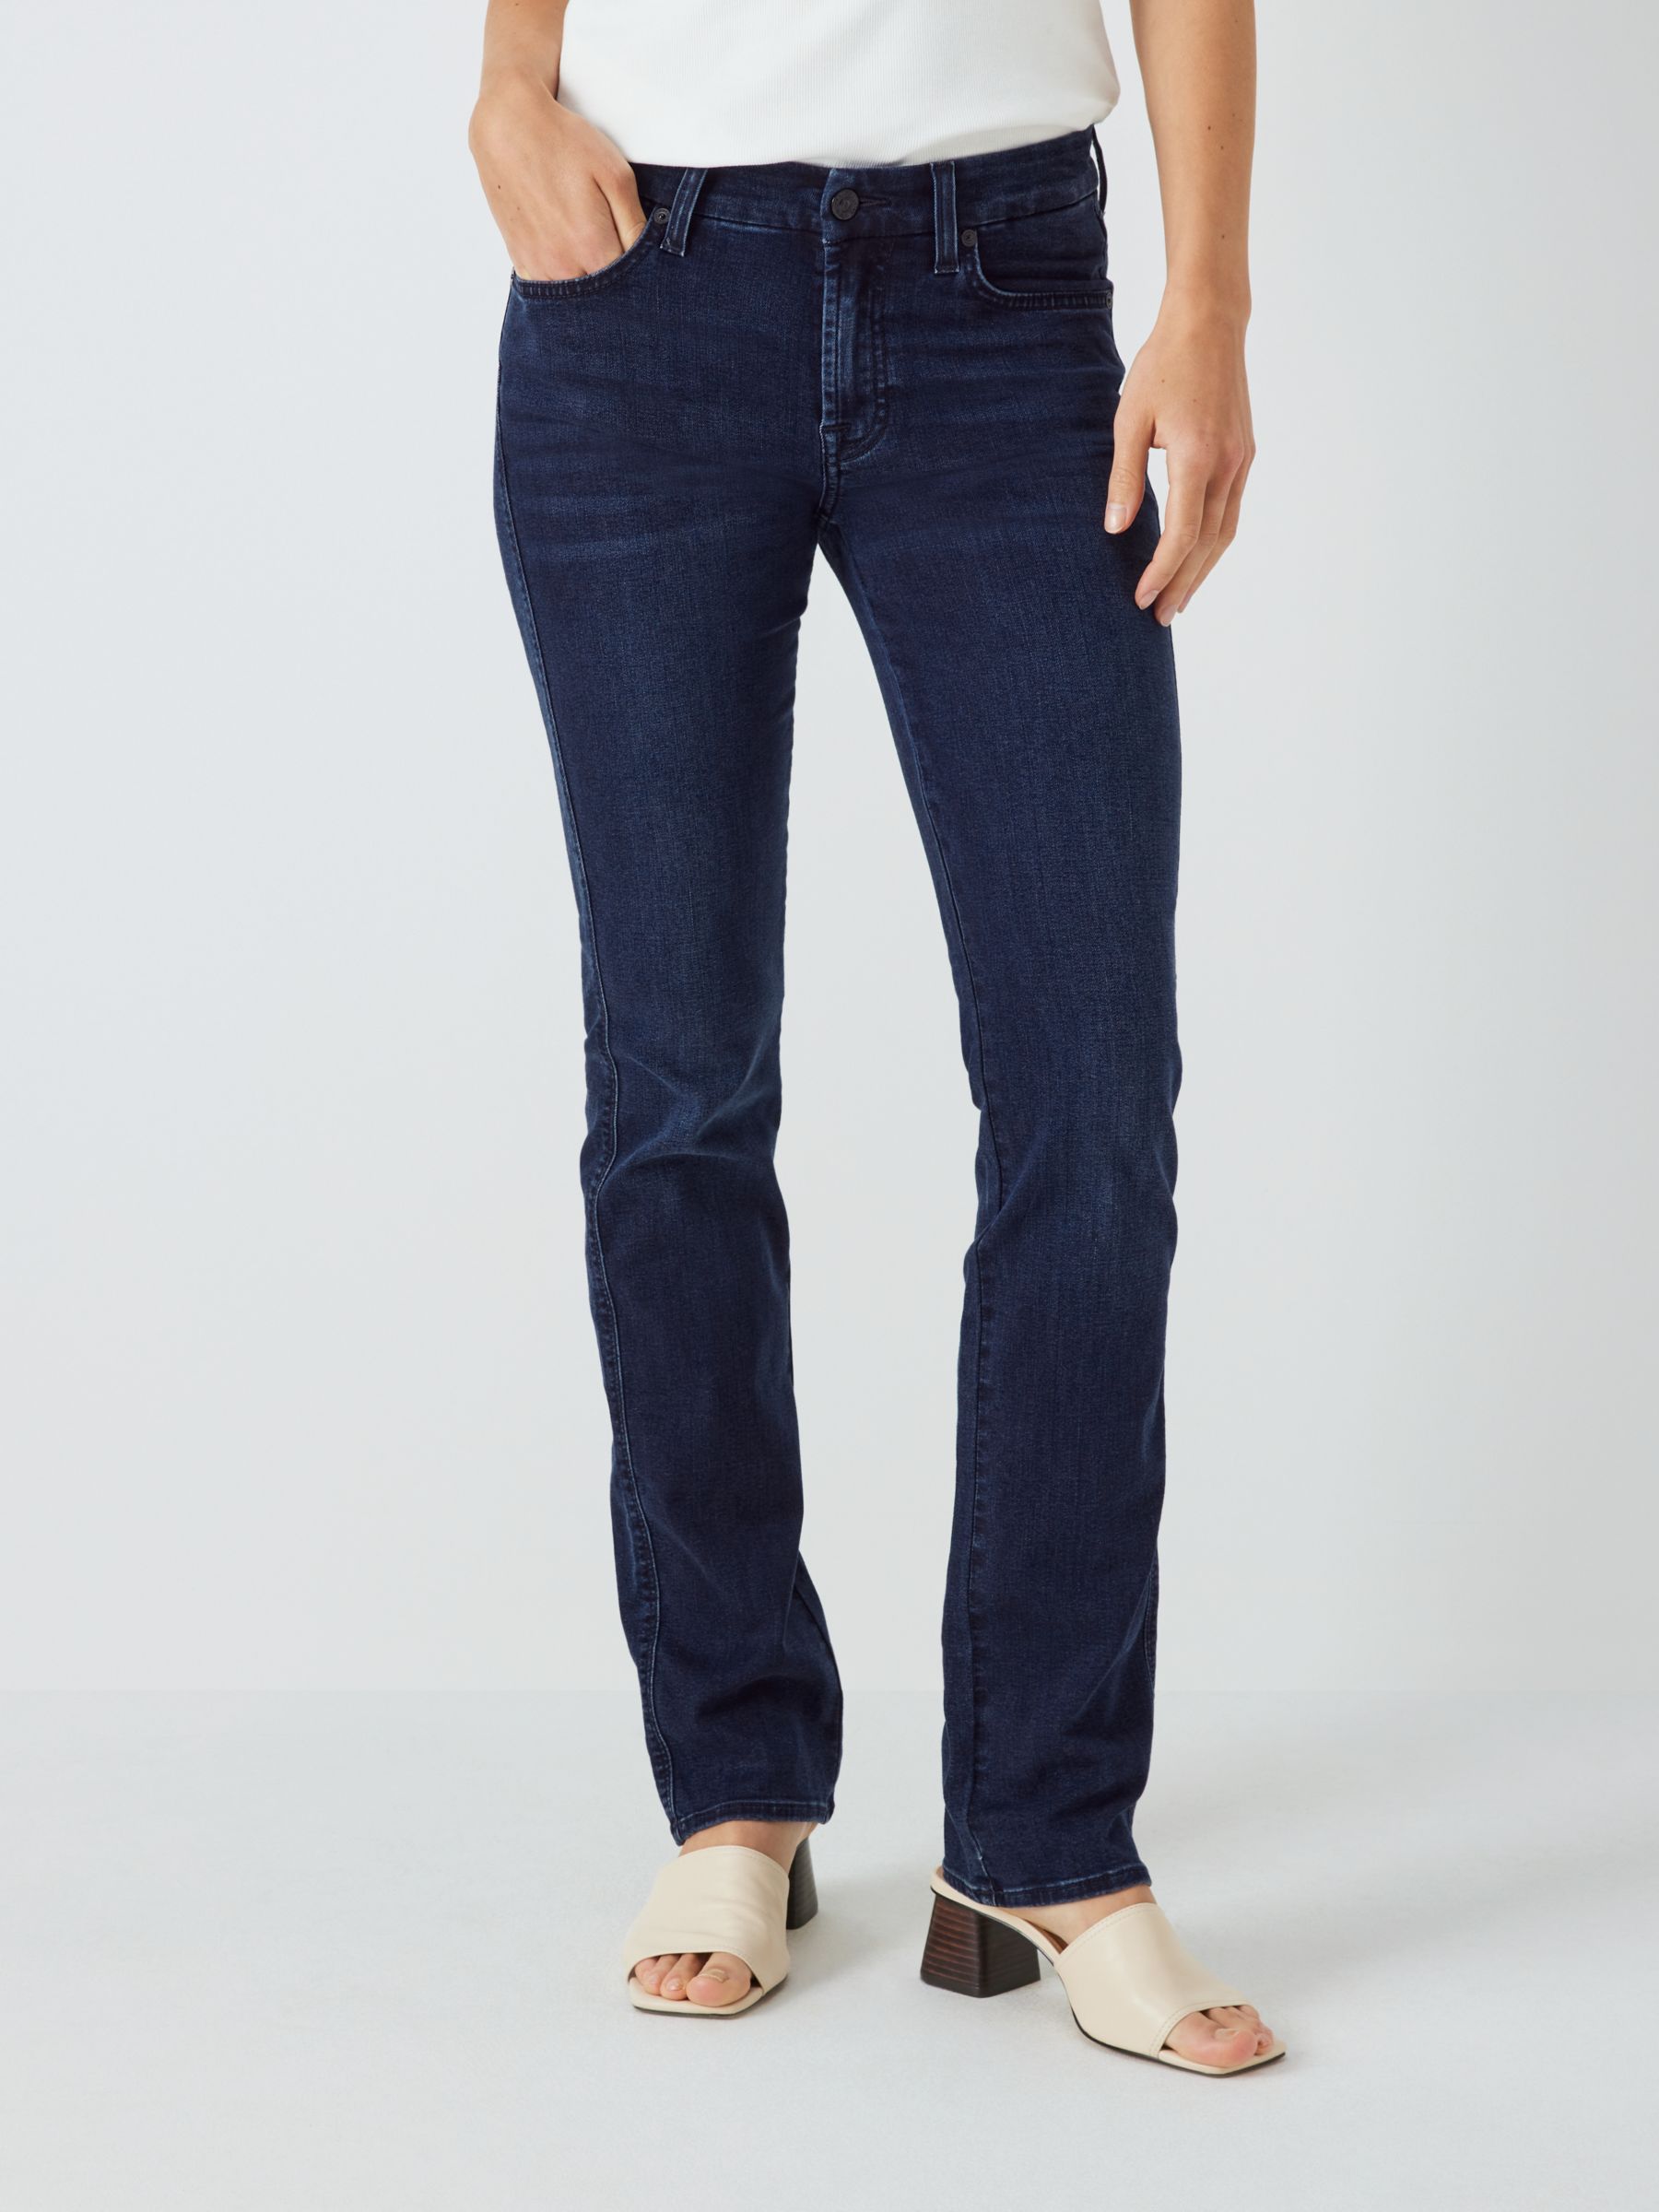 7 For All Mankind Kimmie B(Air) Jeans, Park Avenue, 30